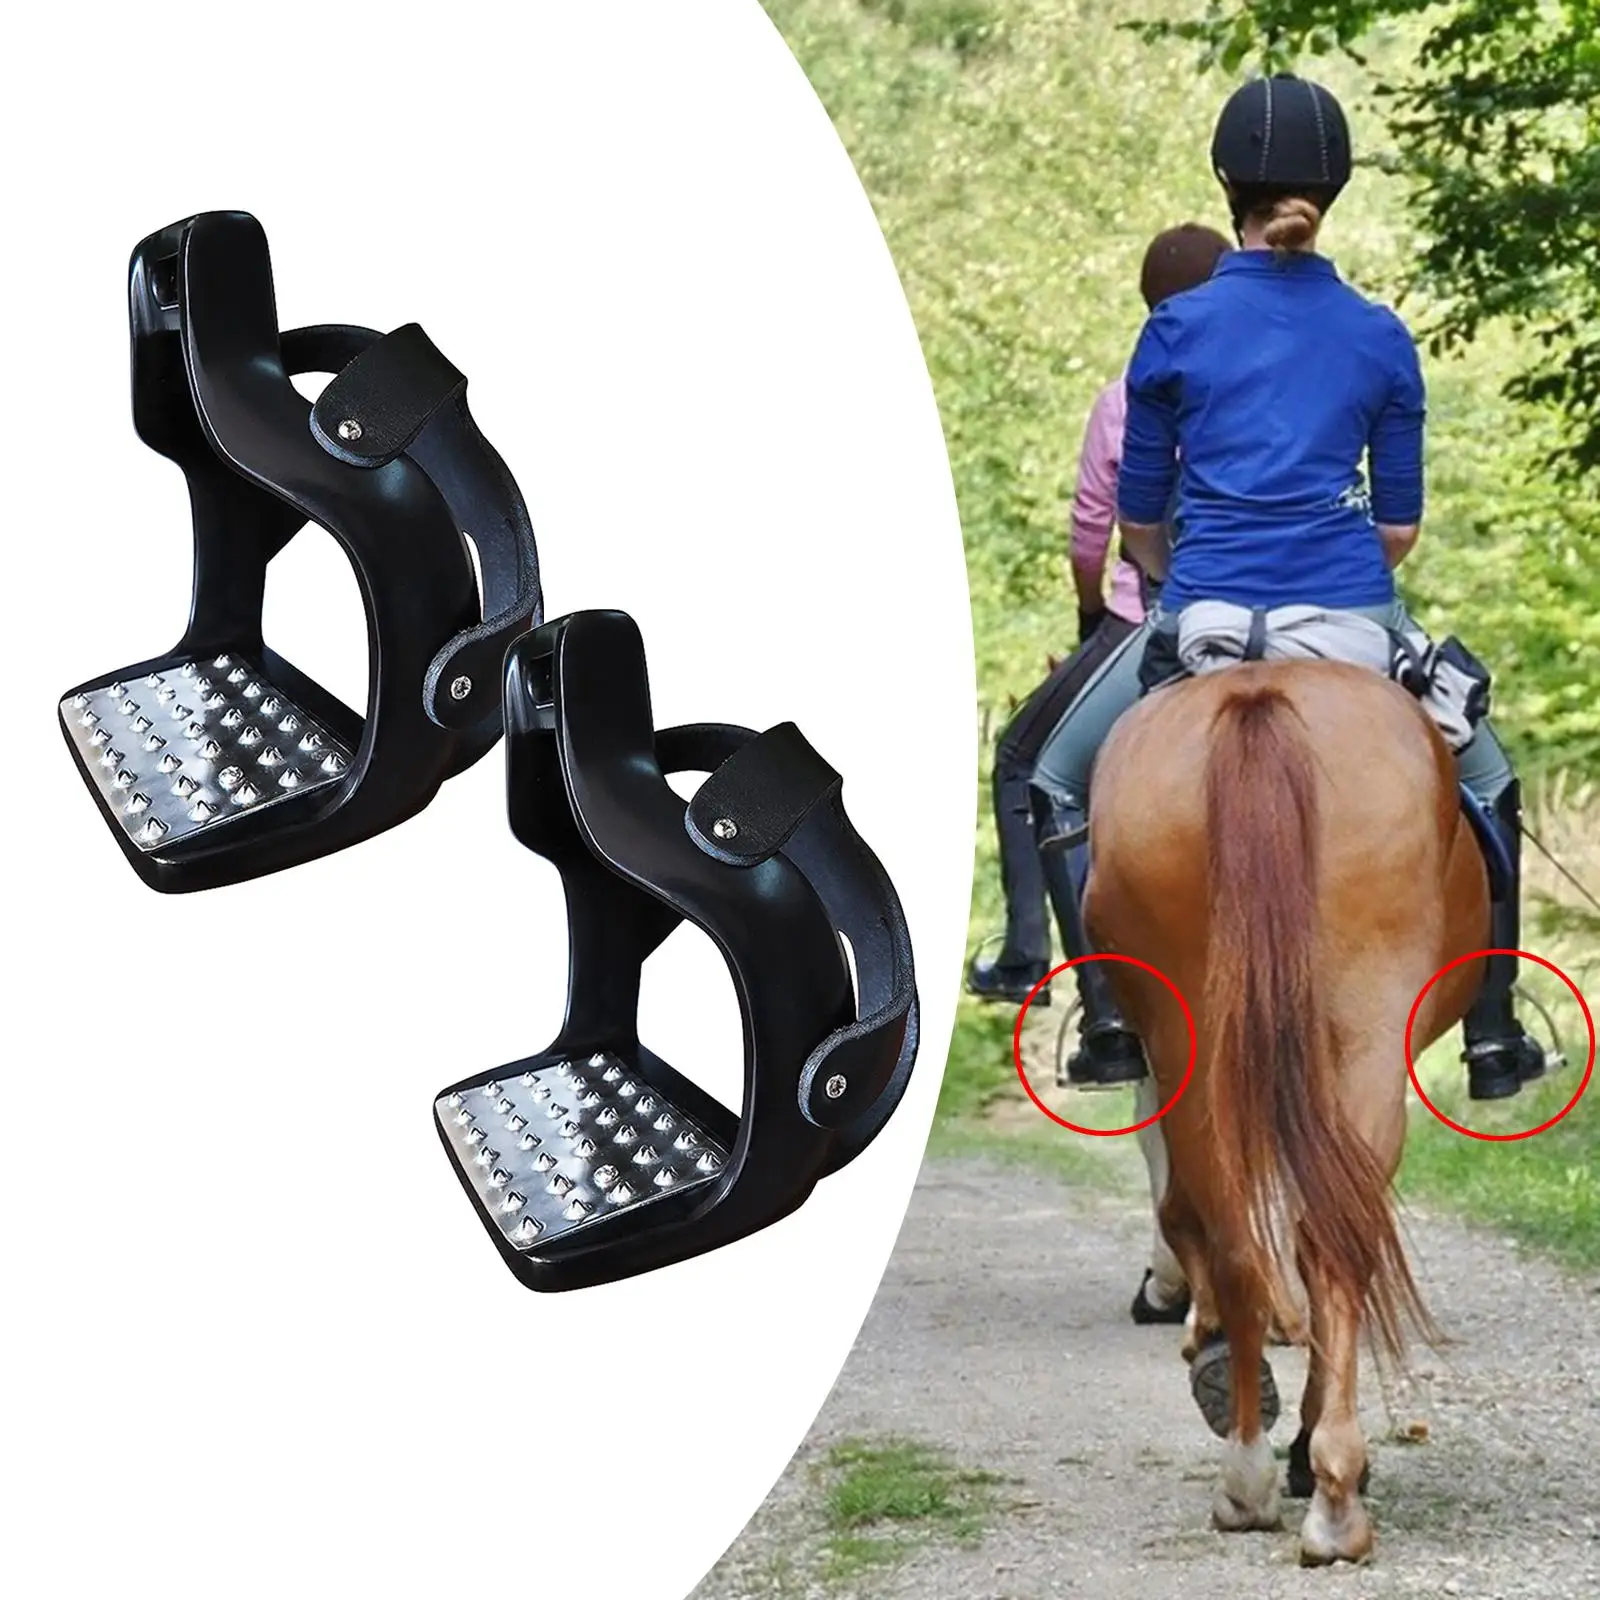  Saddle, Wide s, Horse Riding s  Die-Cast Aluminum  with Stainless Steel Anti-slip Pad for Equestrian Saddle